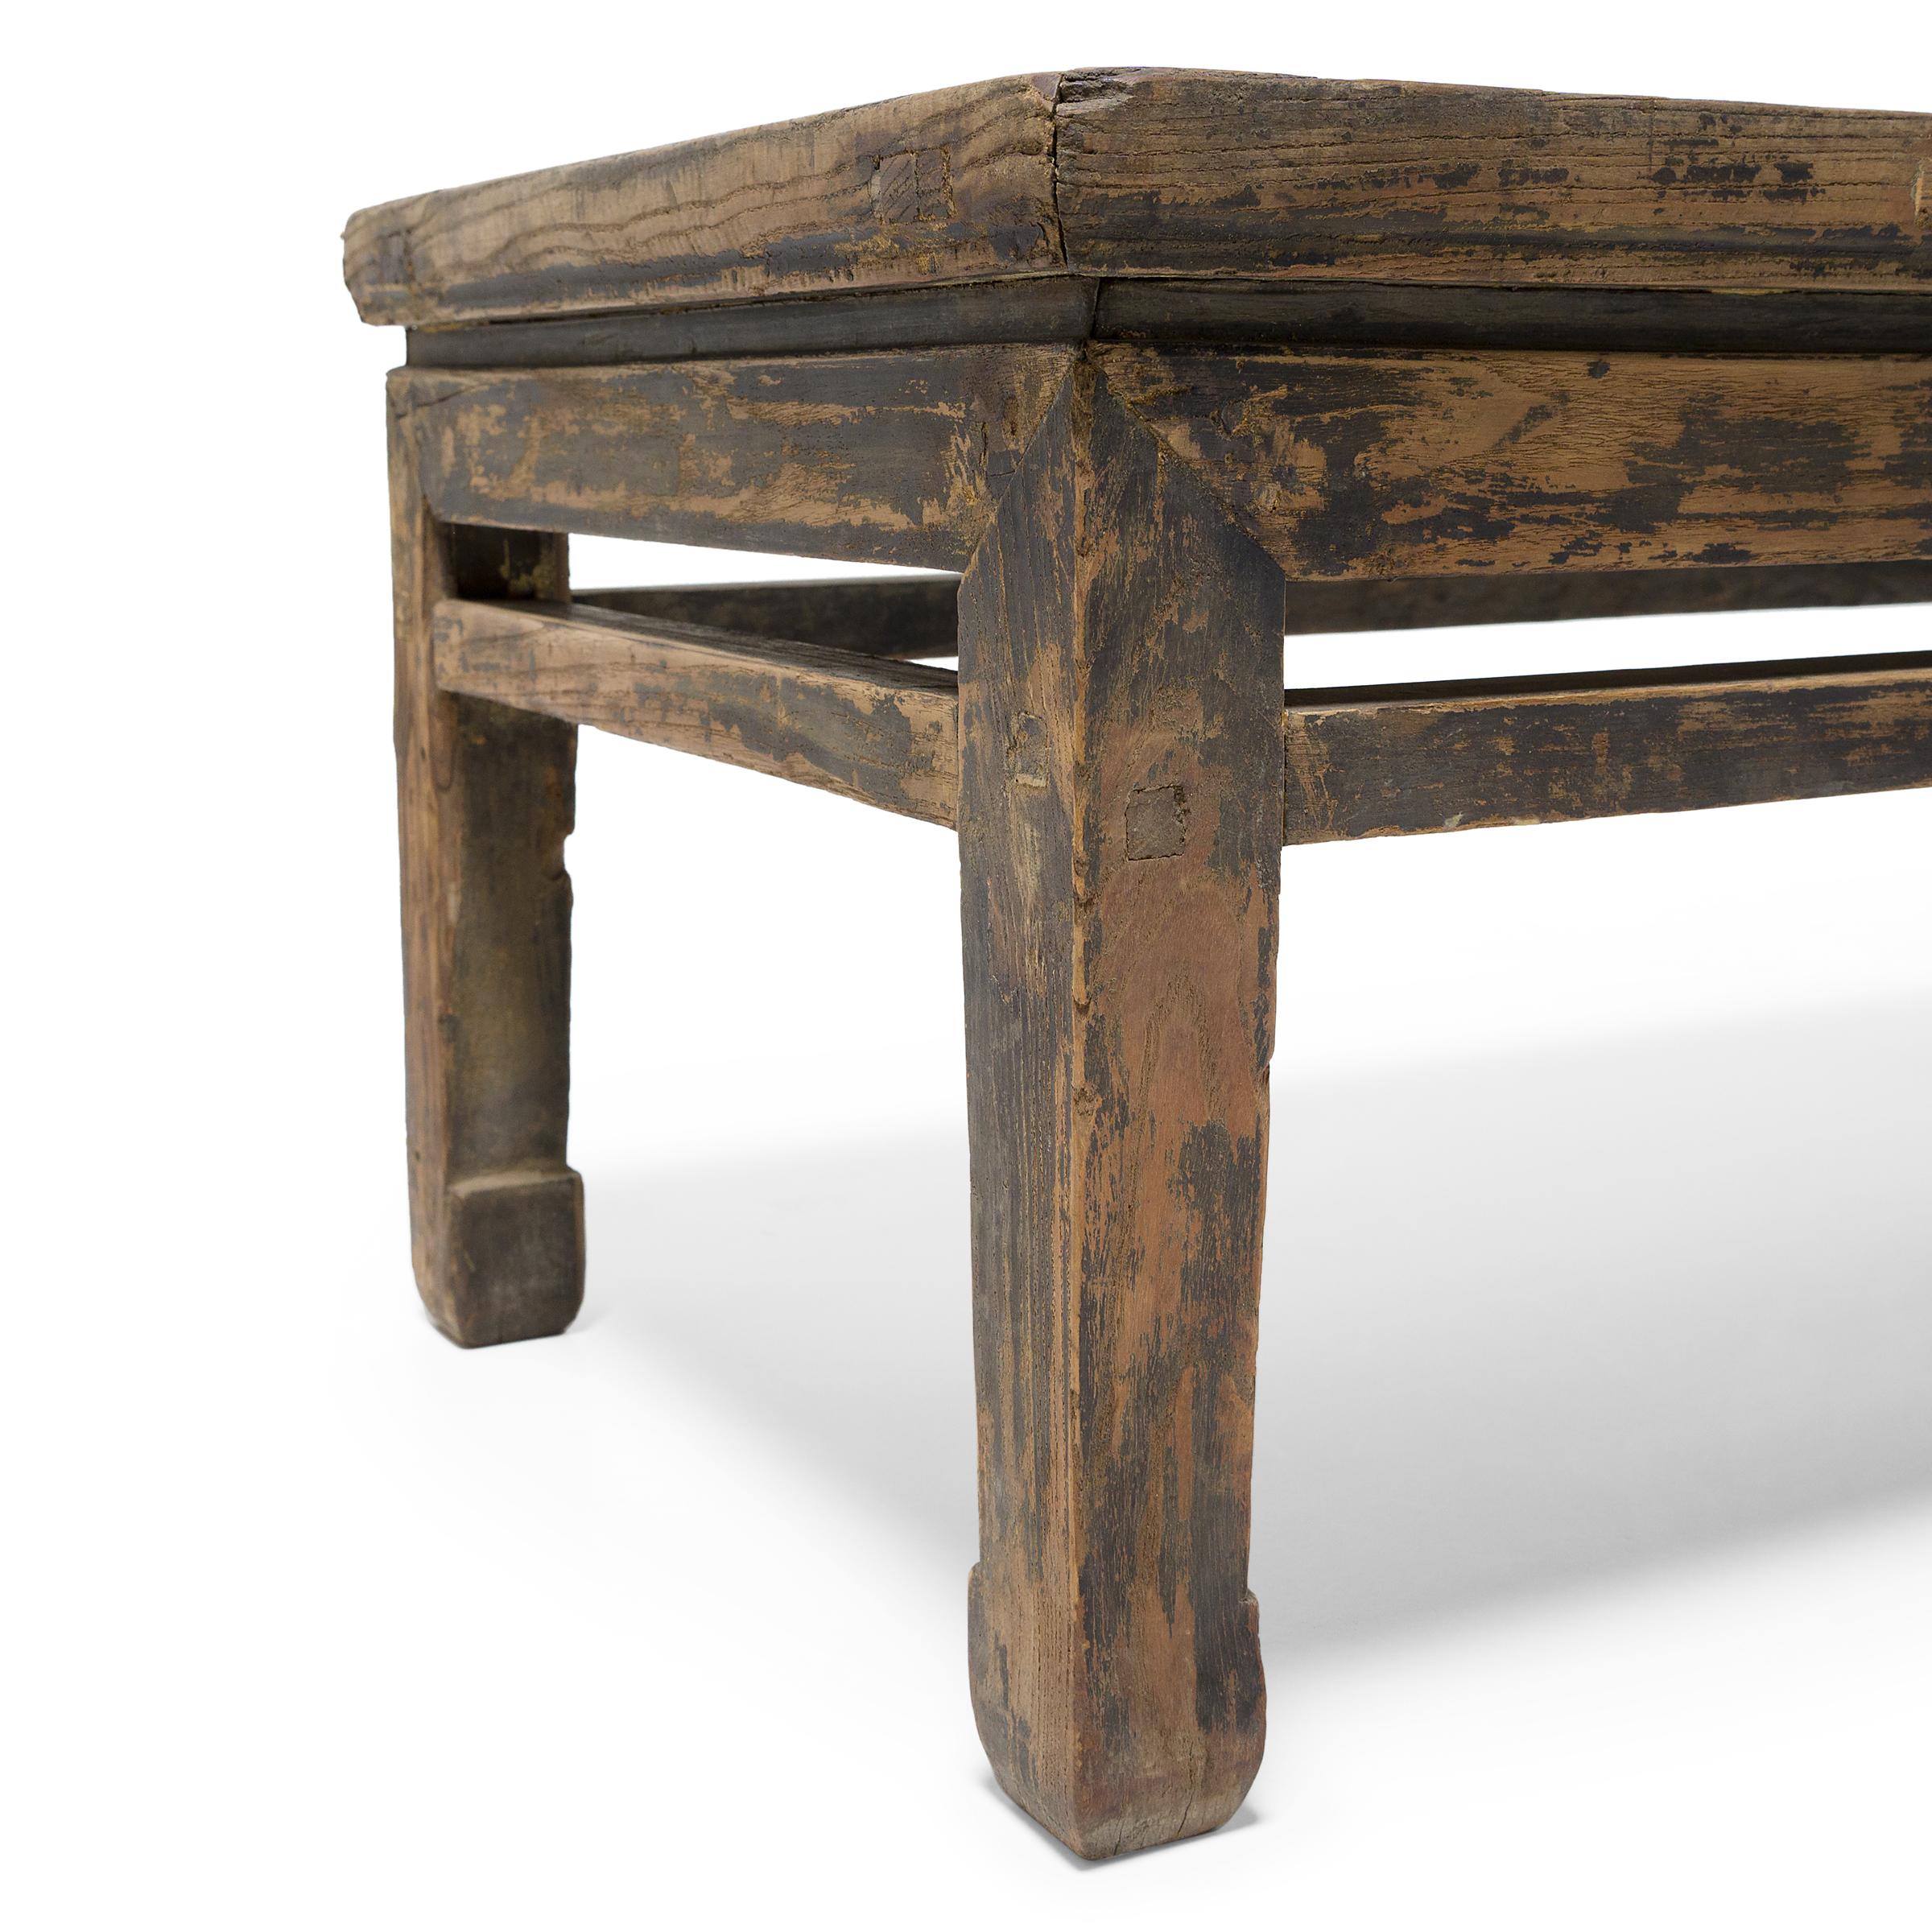 Elm Provincial Chinese Kang Table, C. 1800